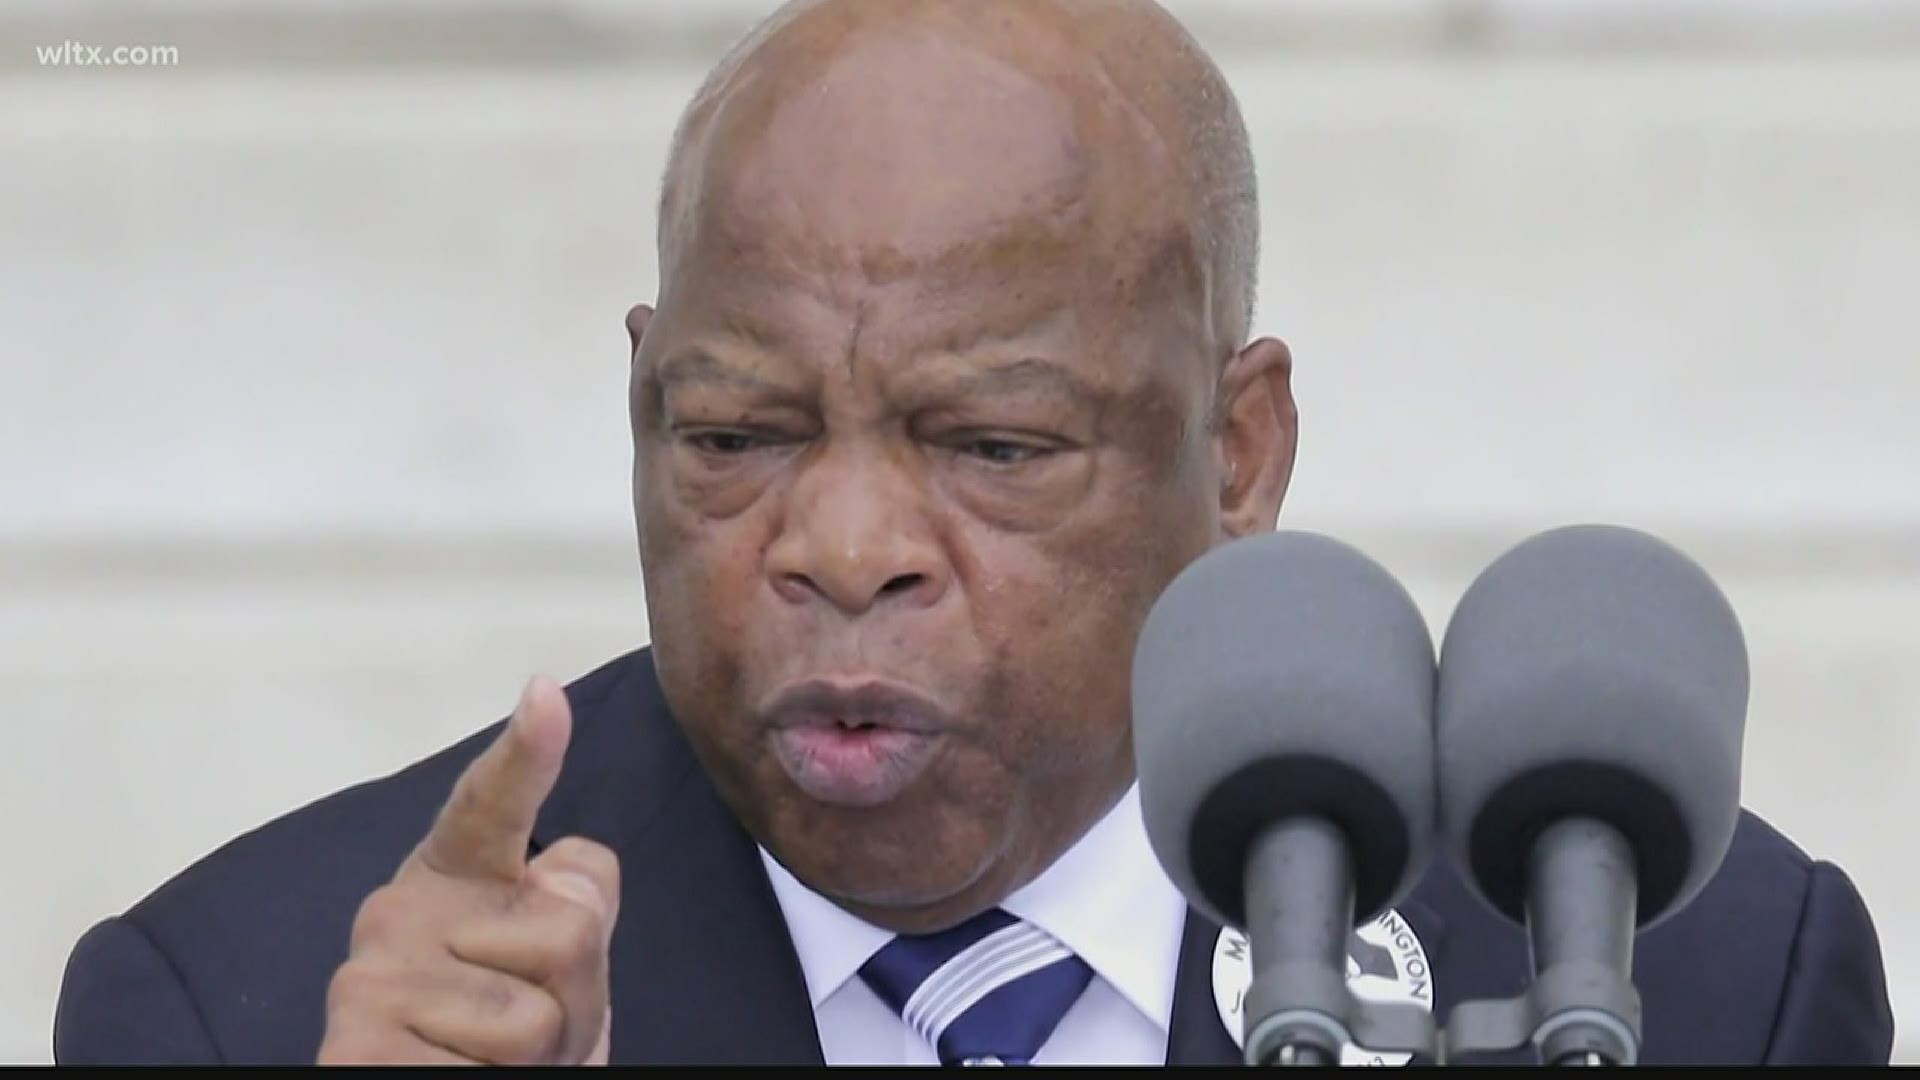 The country continues to mourn the passing of Civil Rights leader and Congressman John Lewis who died last week of pancreatic cancer at the age of 80.